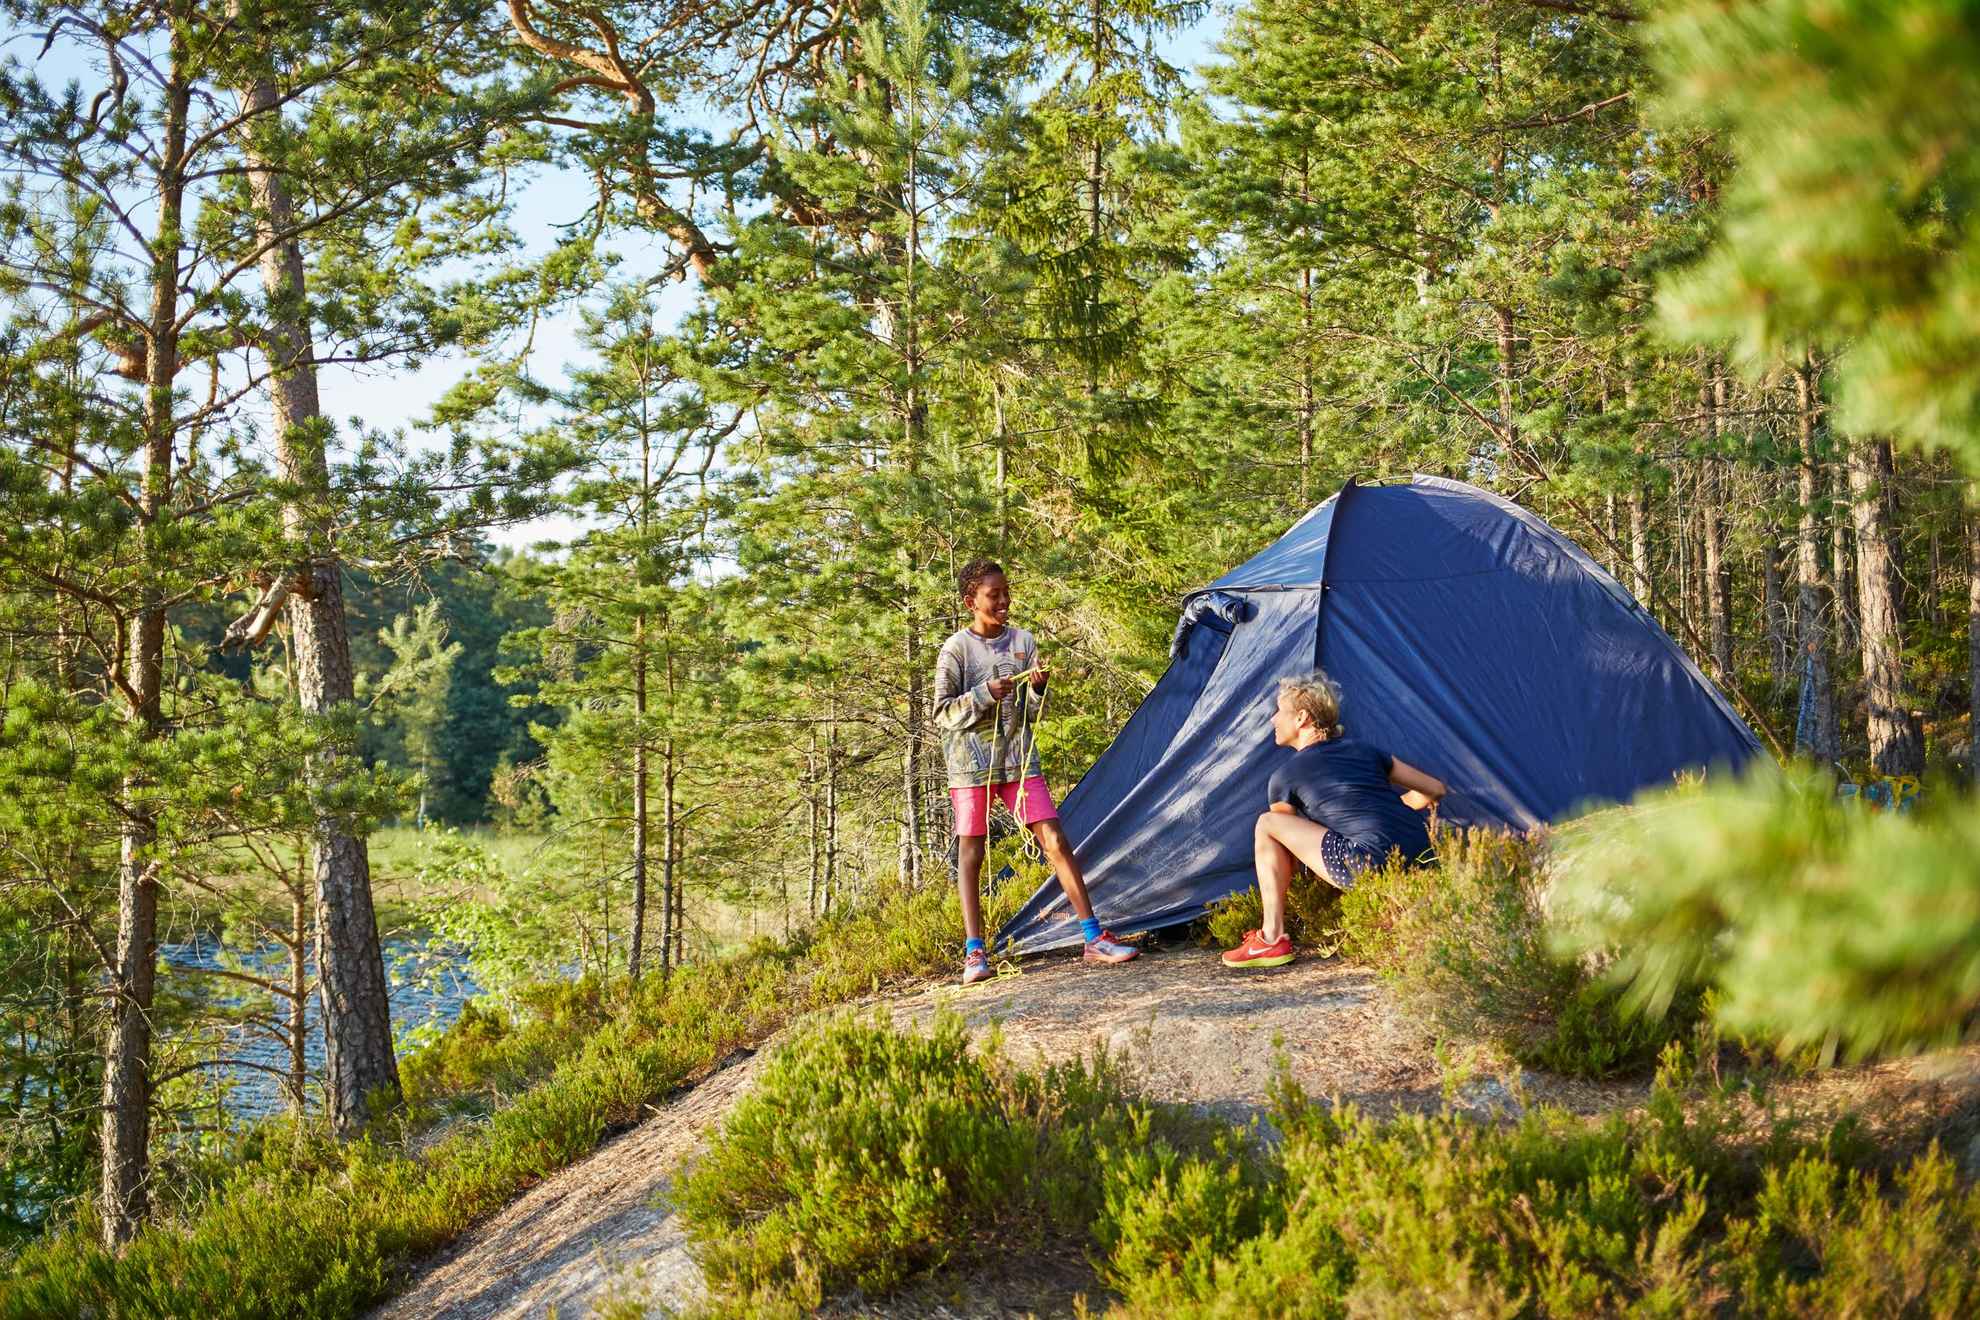 Two people in Sweden are by a tent in the woods next to a lake.